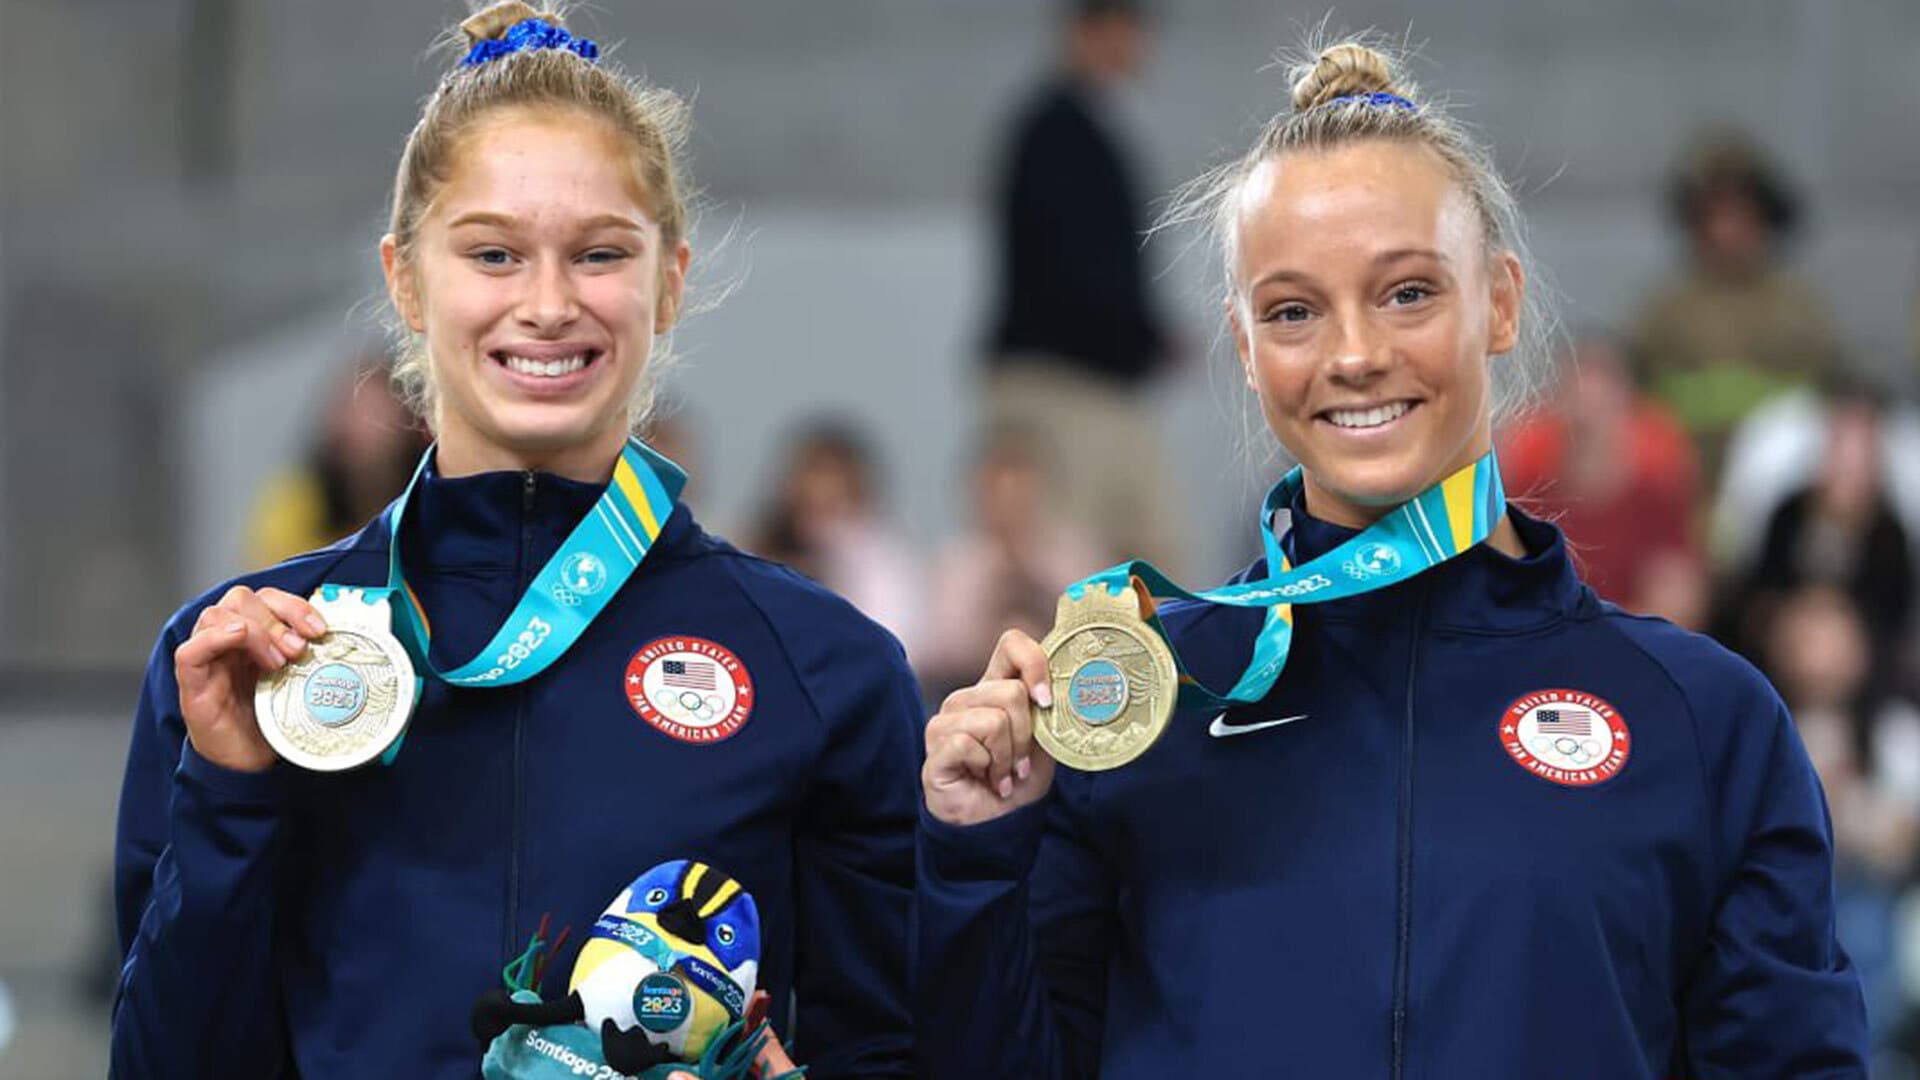 two female athletes show off gold medals